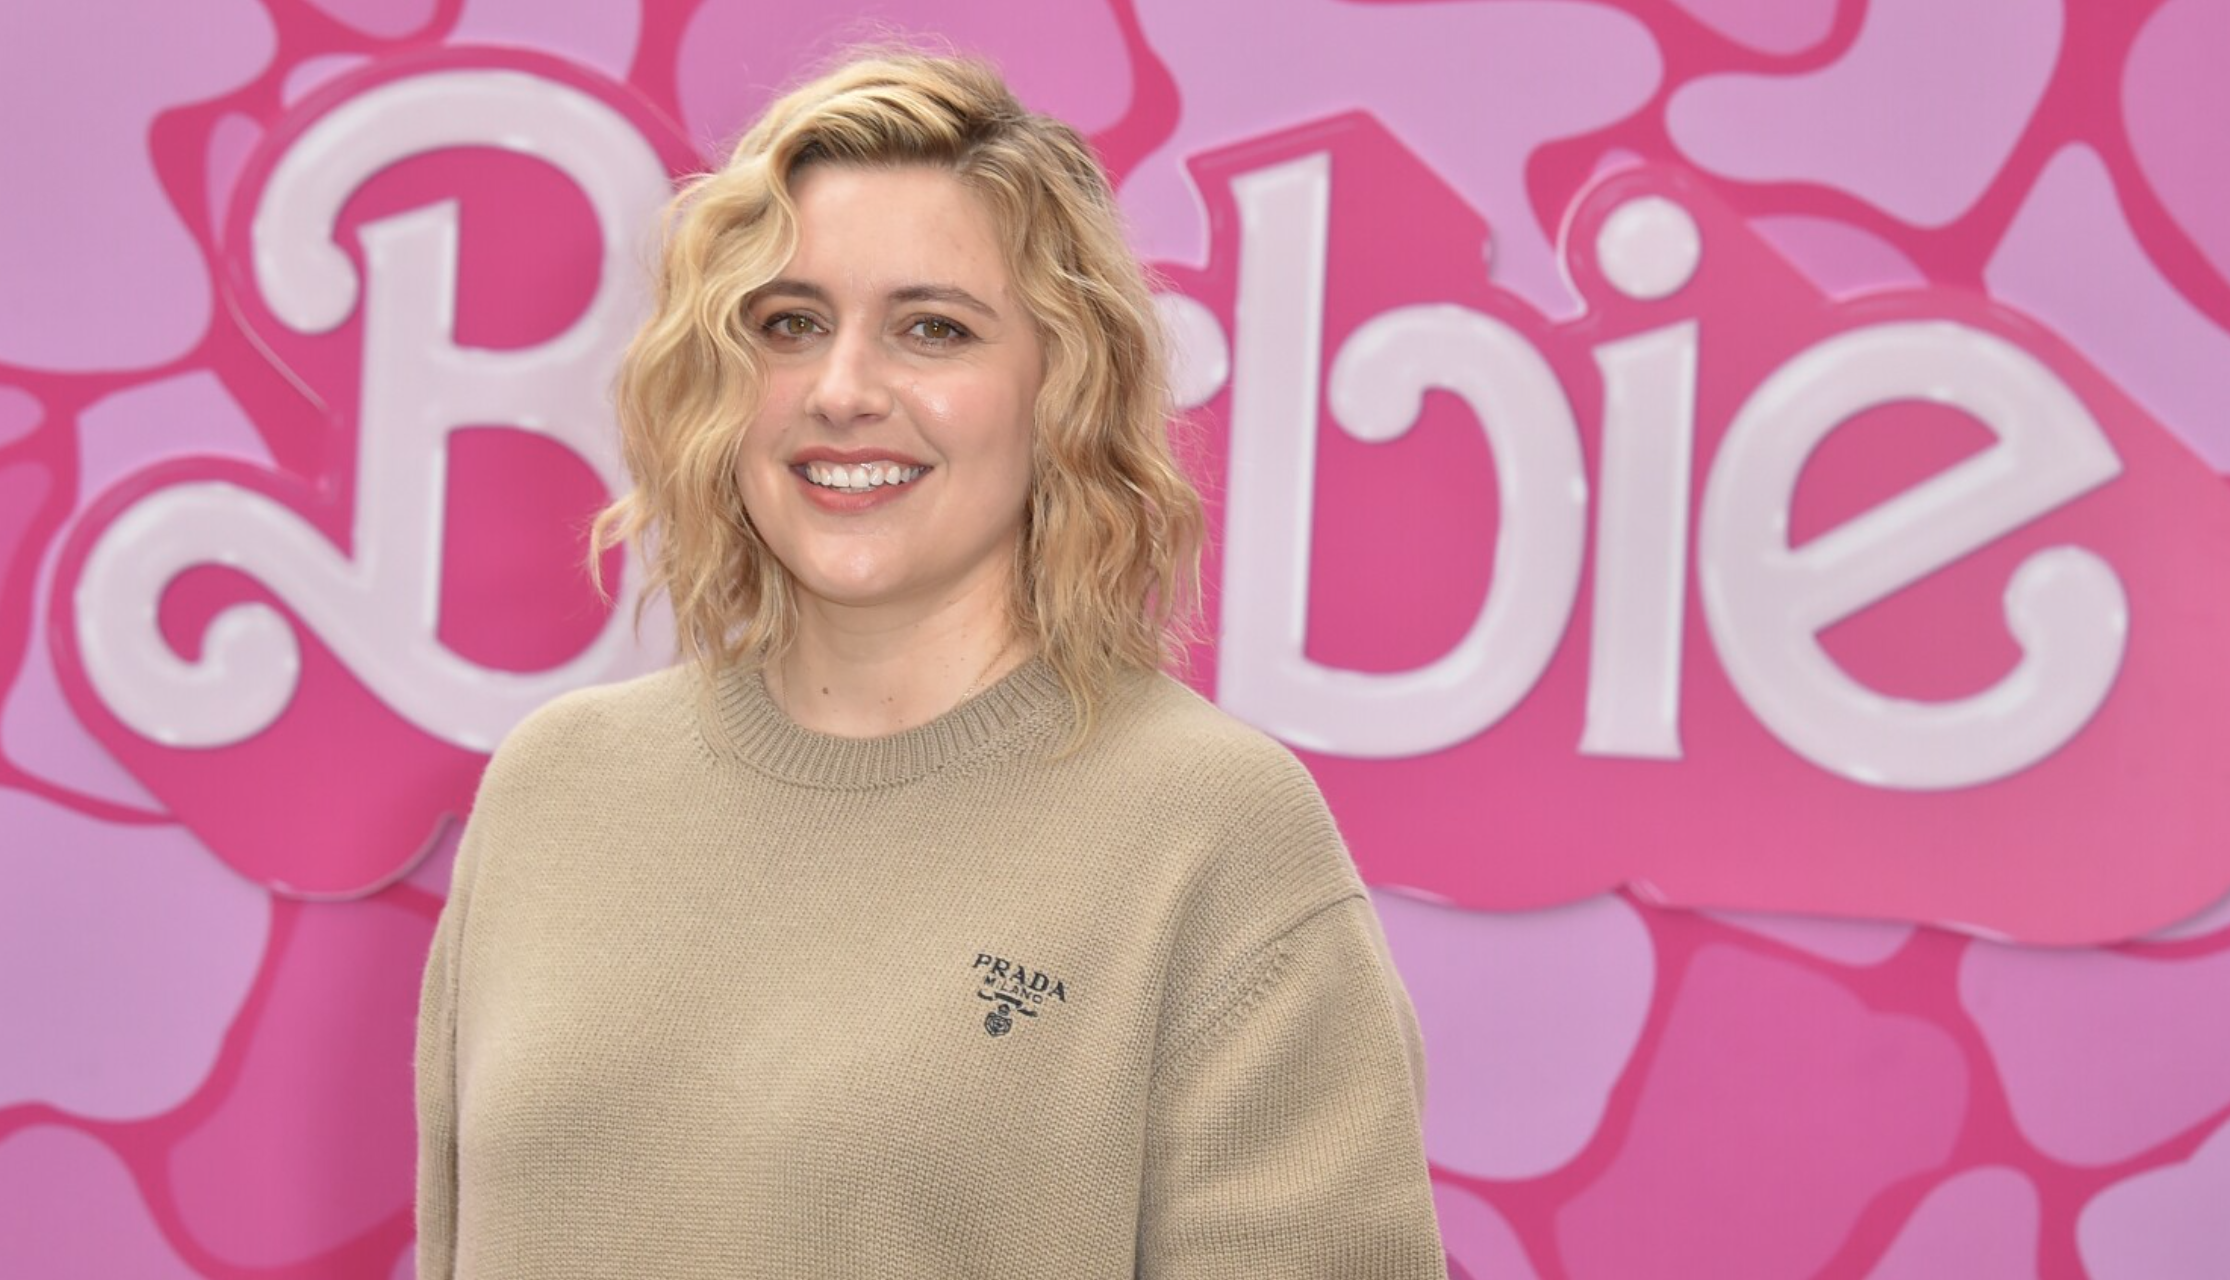 Greta Gerwig, Director of Barbie, Delights Fans at Palm Springs Film Festival as She Receives Director of the Year Honors.